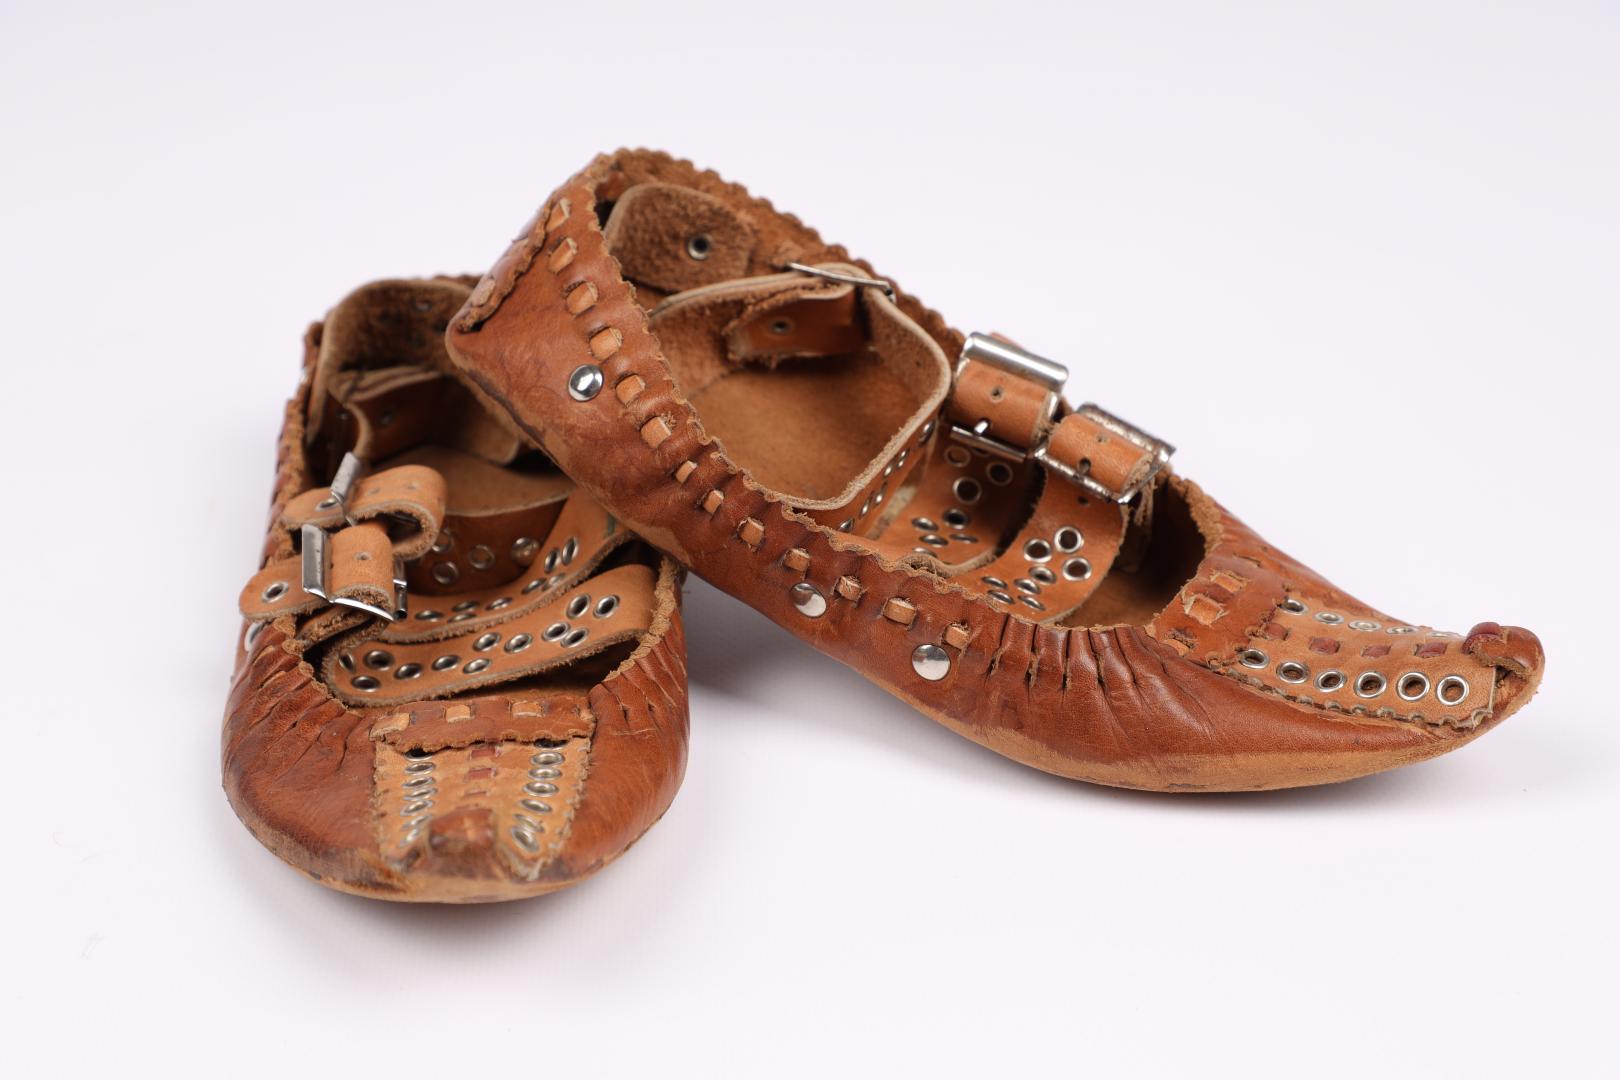 Postoly (women's boots) decorated with tin rings - kapsli